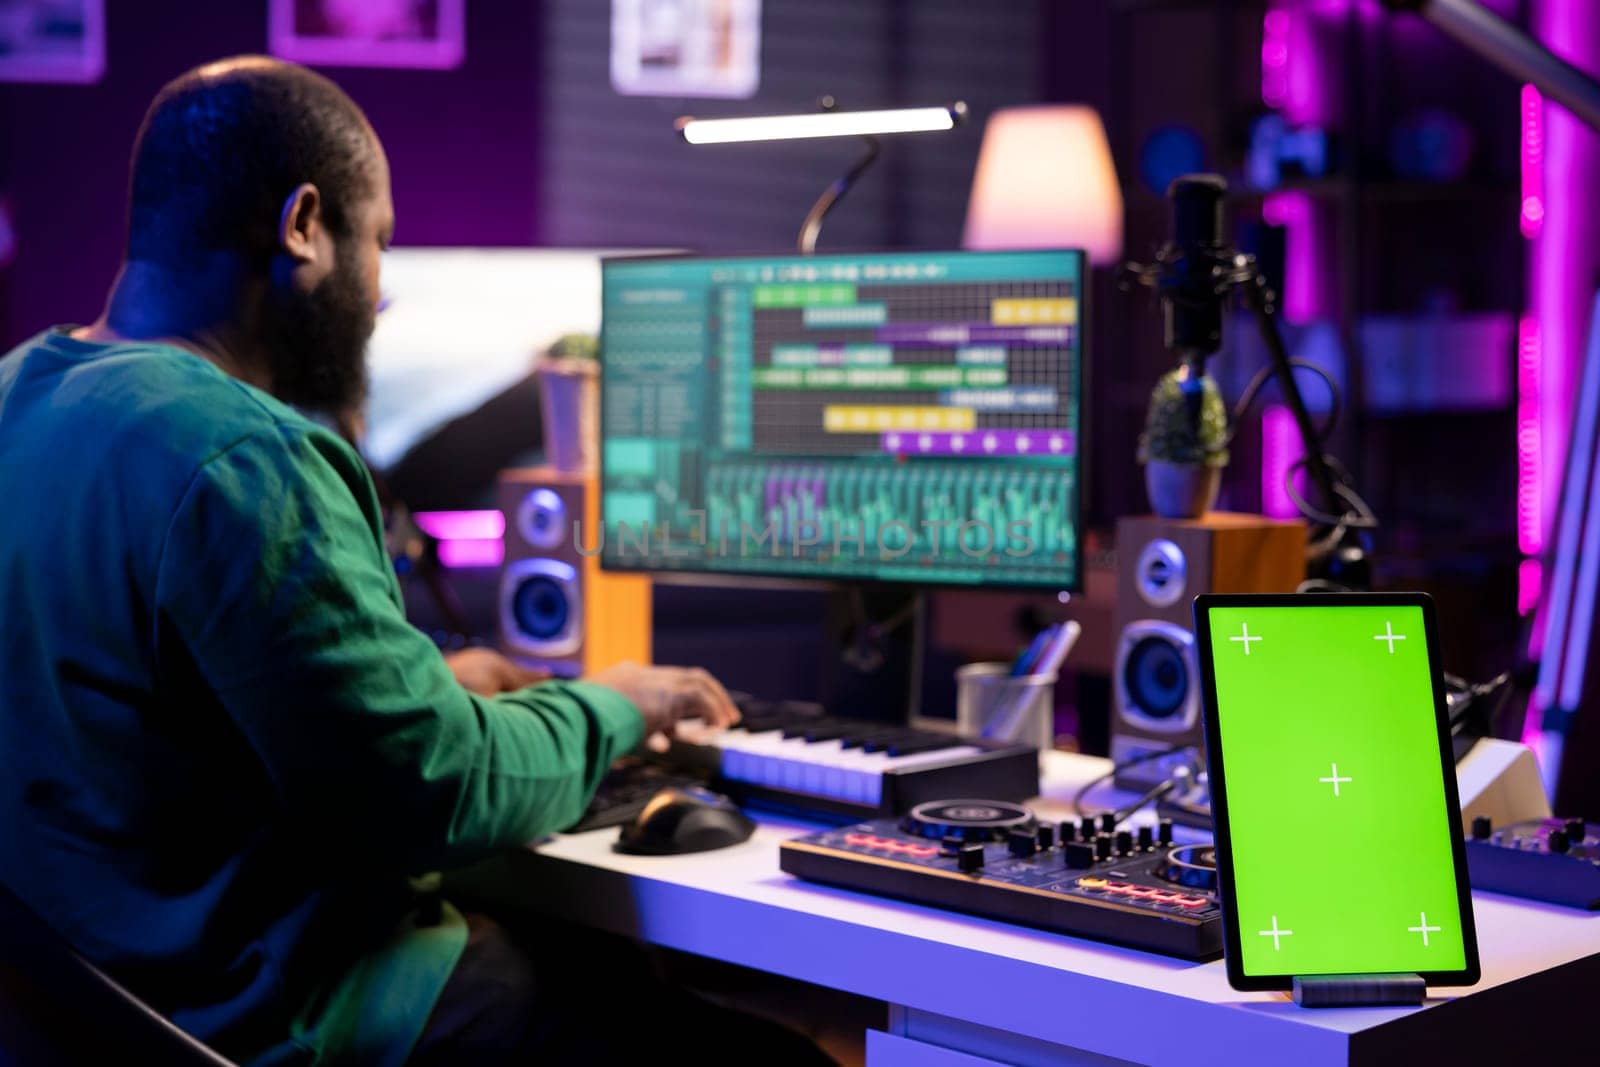 Composer editing his audio files and recordings on daw software, sitting next to a greenscreen display. Skilled sound technician uses mixing and mastering gear to produce new material.